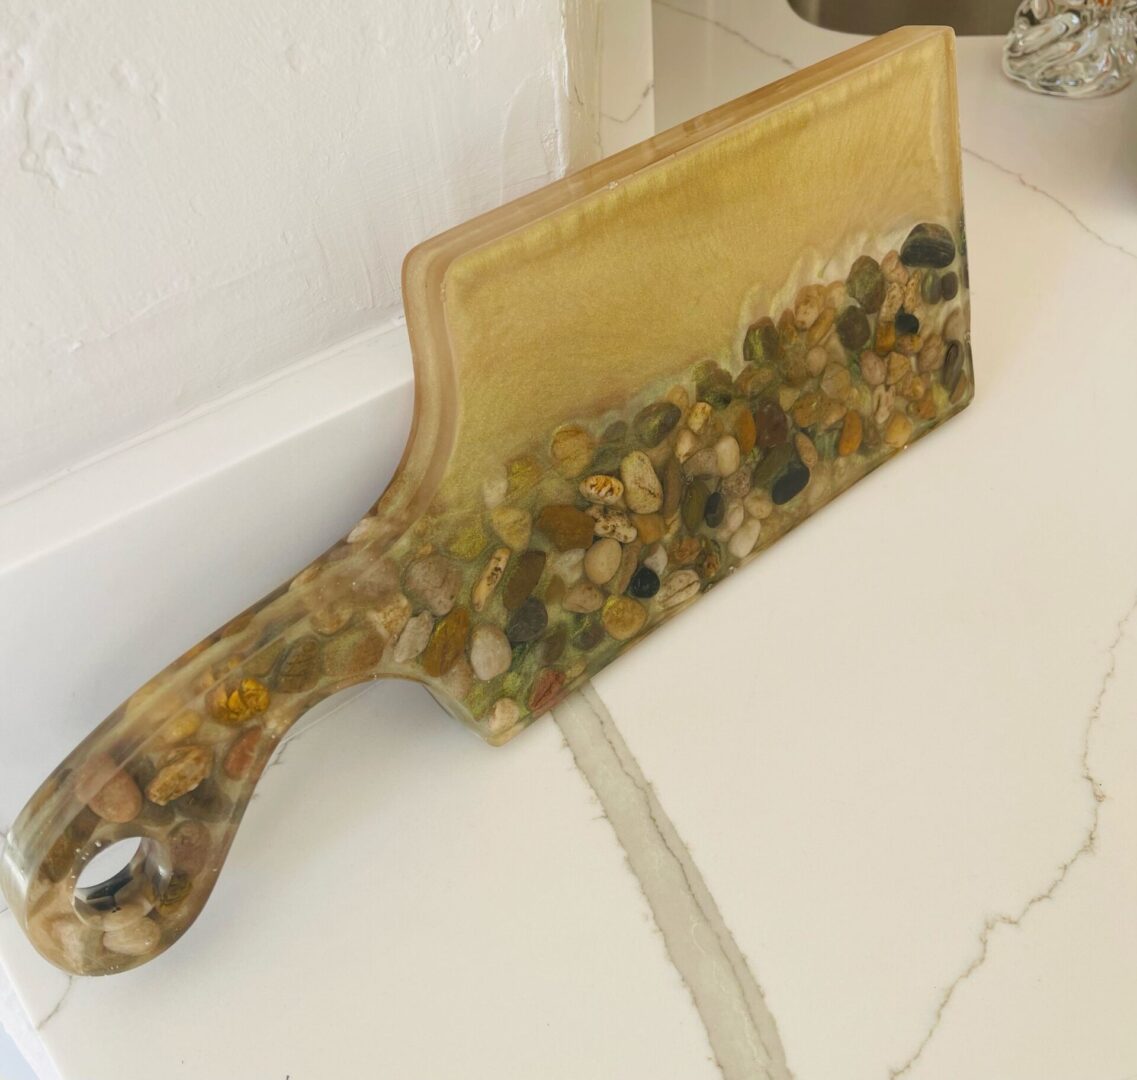 A marble cutting board with rocks on it